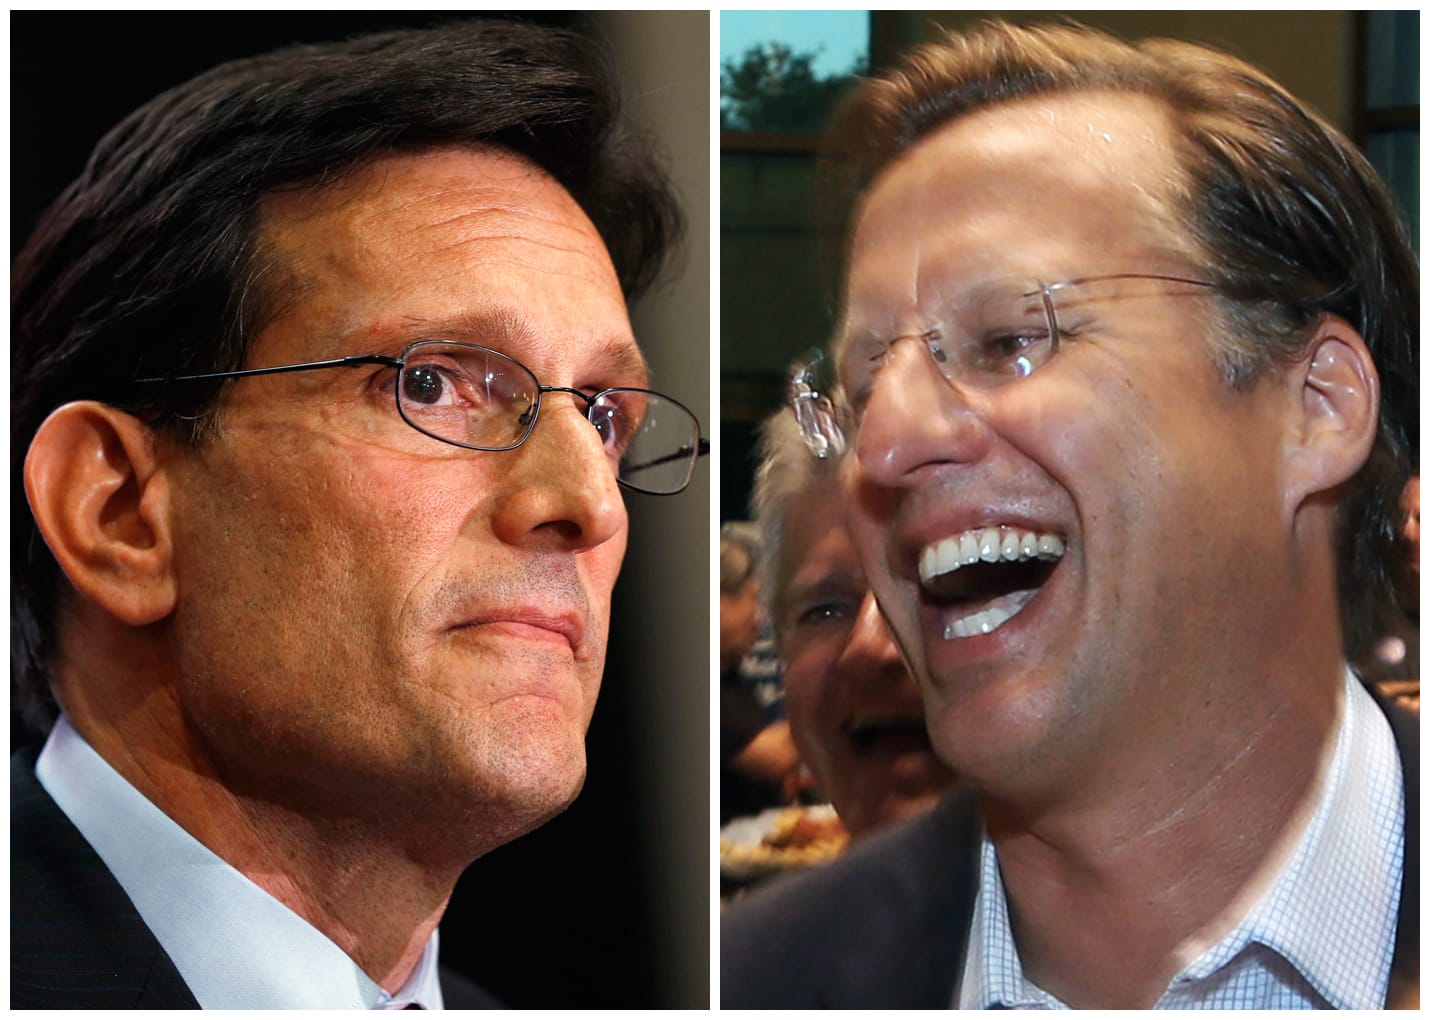 In this combination of Associated Press photos, House Majority Leader Eric Cantor, R-Va., left, and Dave Brat, right, react after the polls close Tuesday in Richmond, Va.